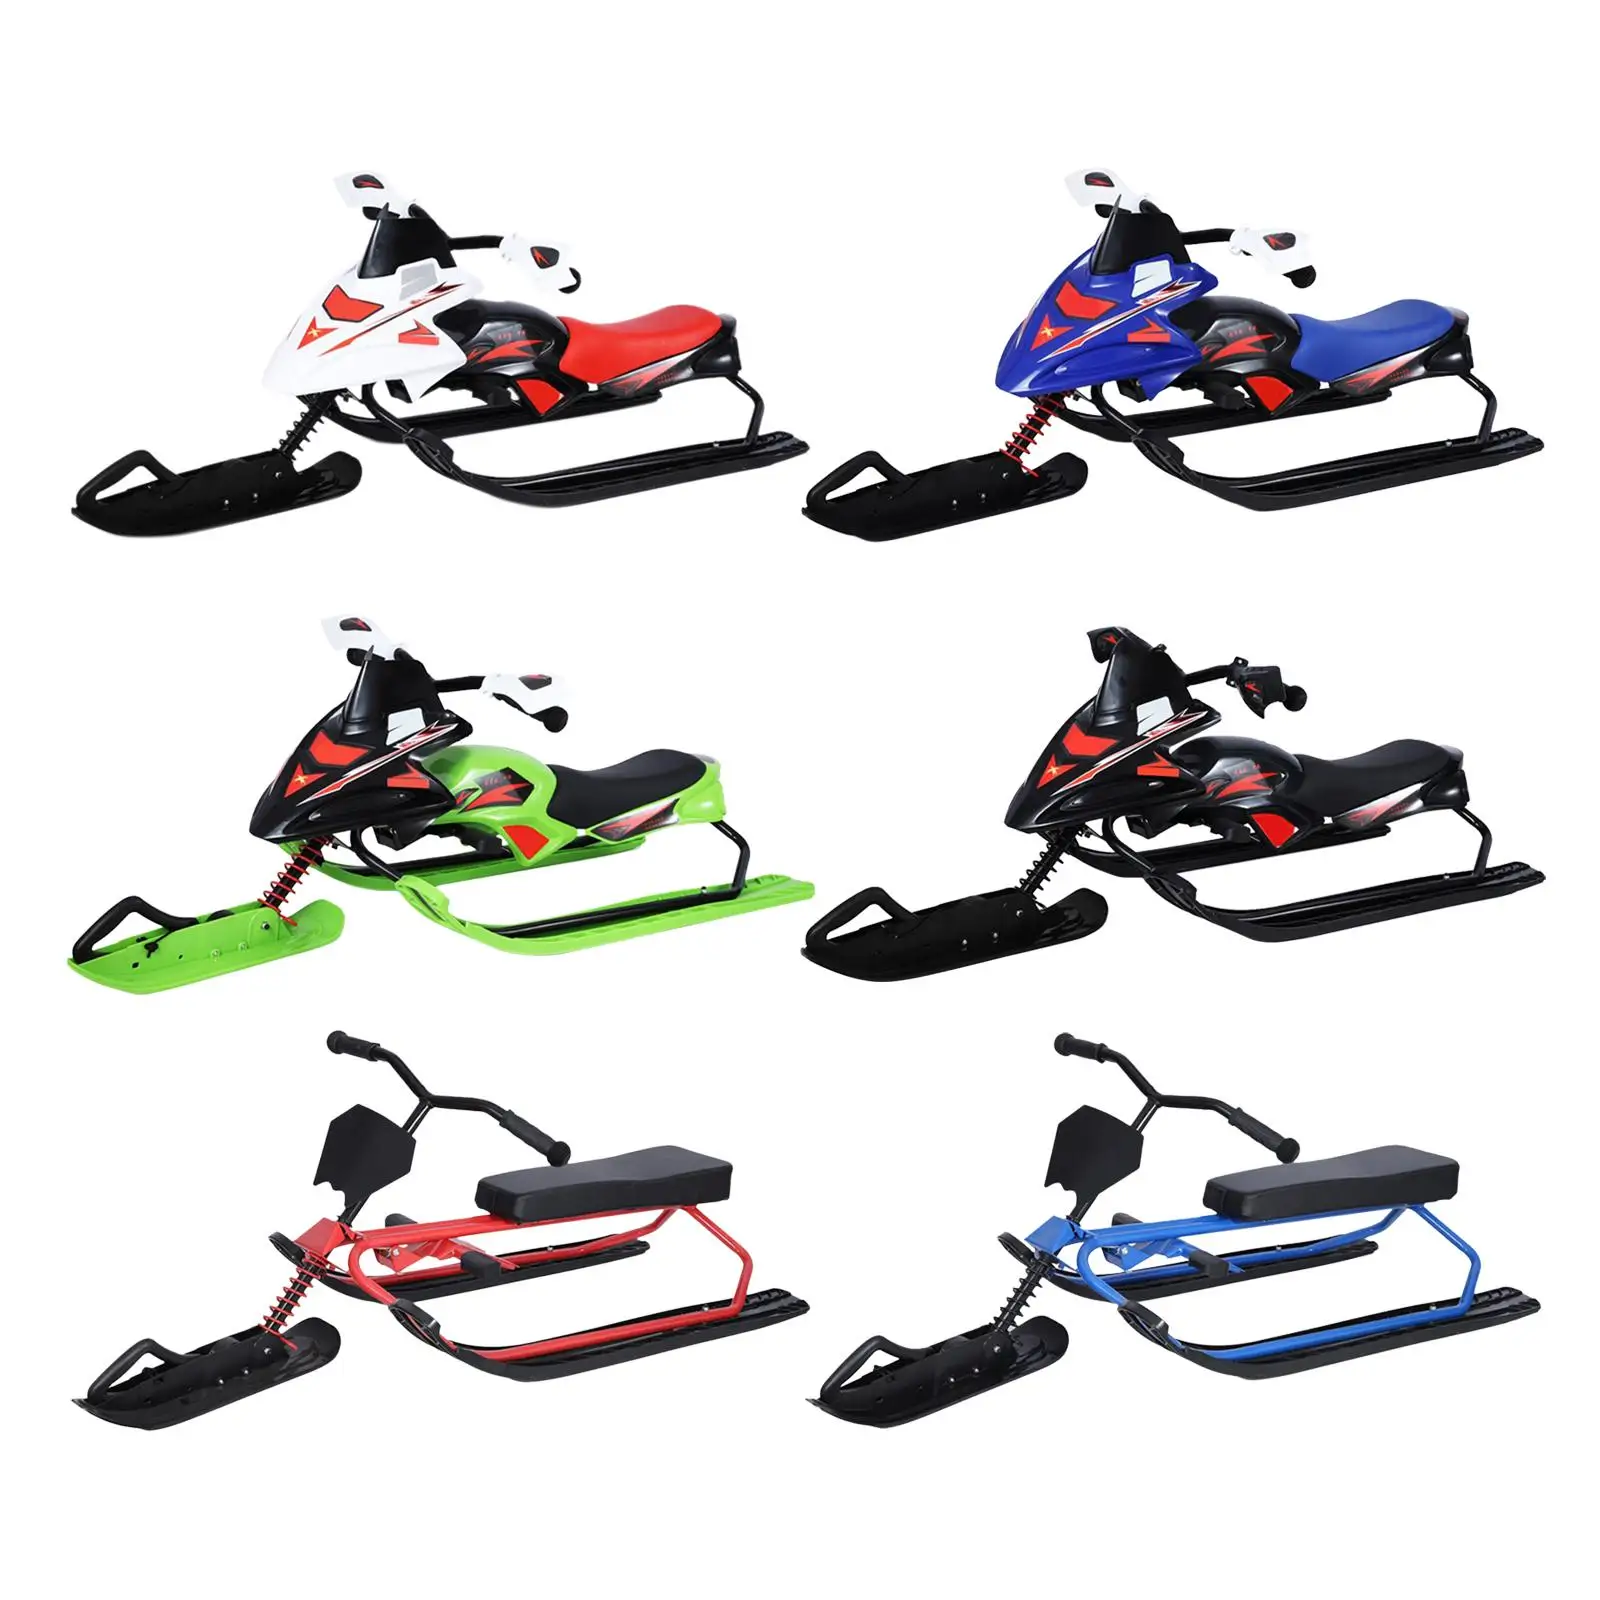 Snow Racer Sled with Steering Wheel and Twin Brakes Sleigh for Winter Sports